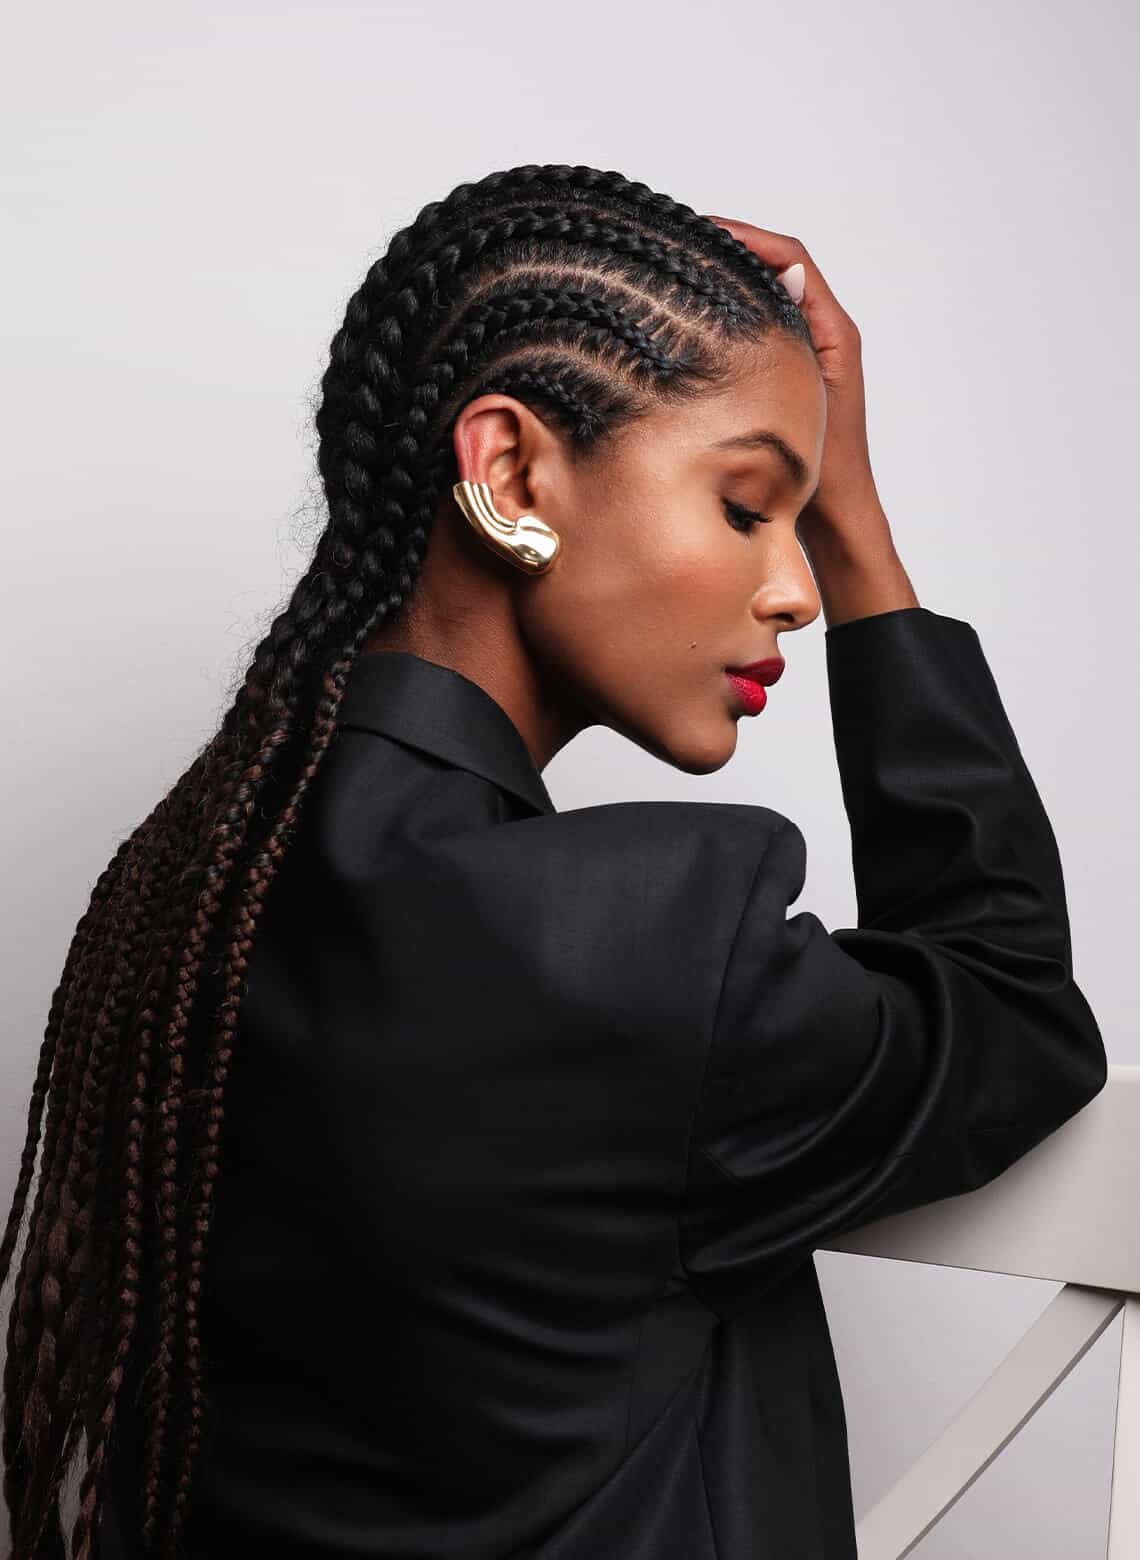 person with long stitch braids, gold ear cuff, and black blazer turned to the side and looking down